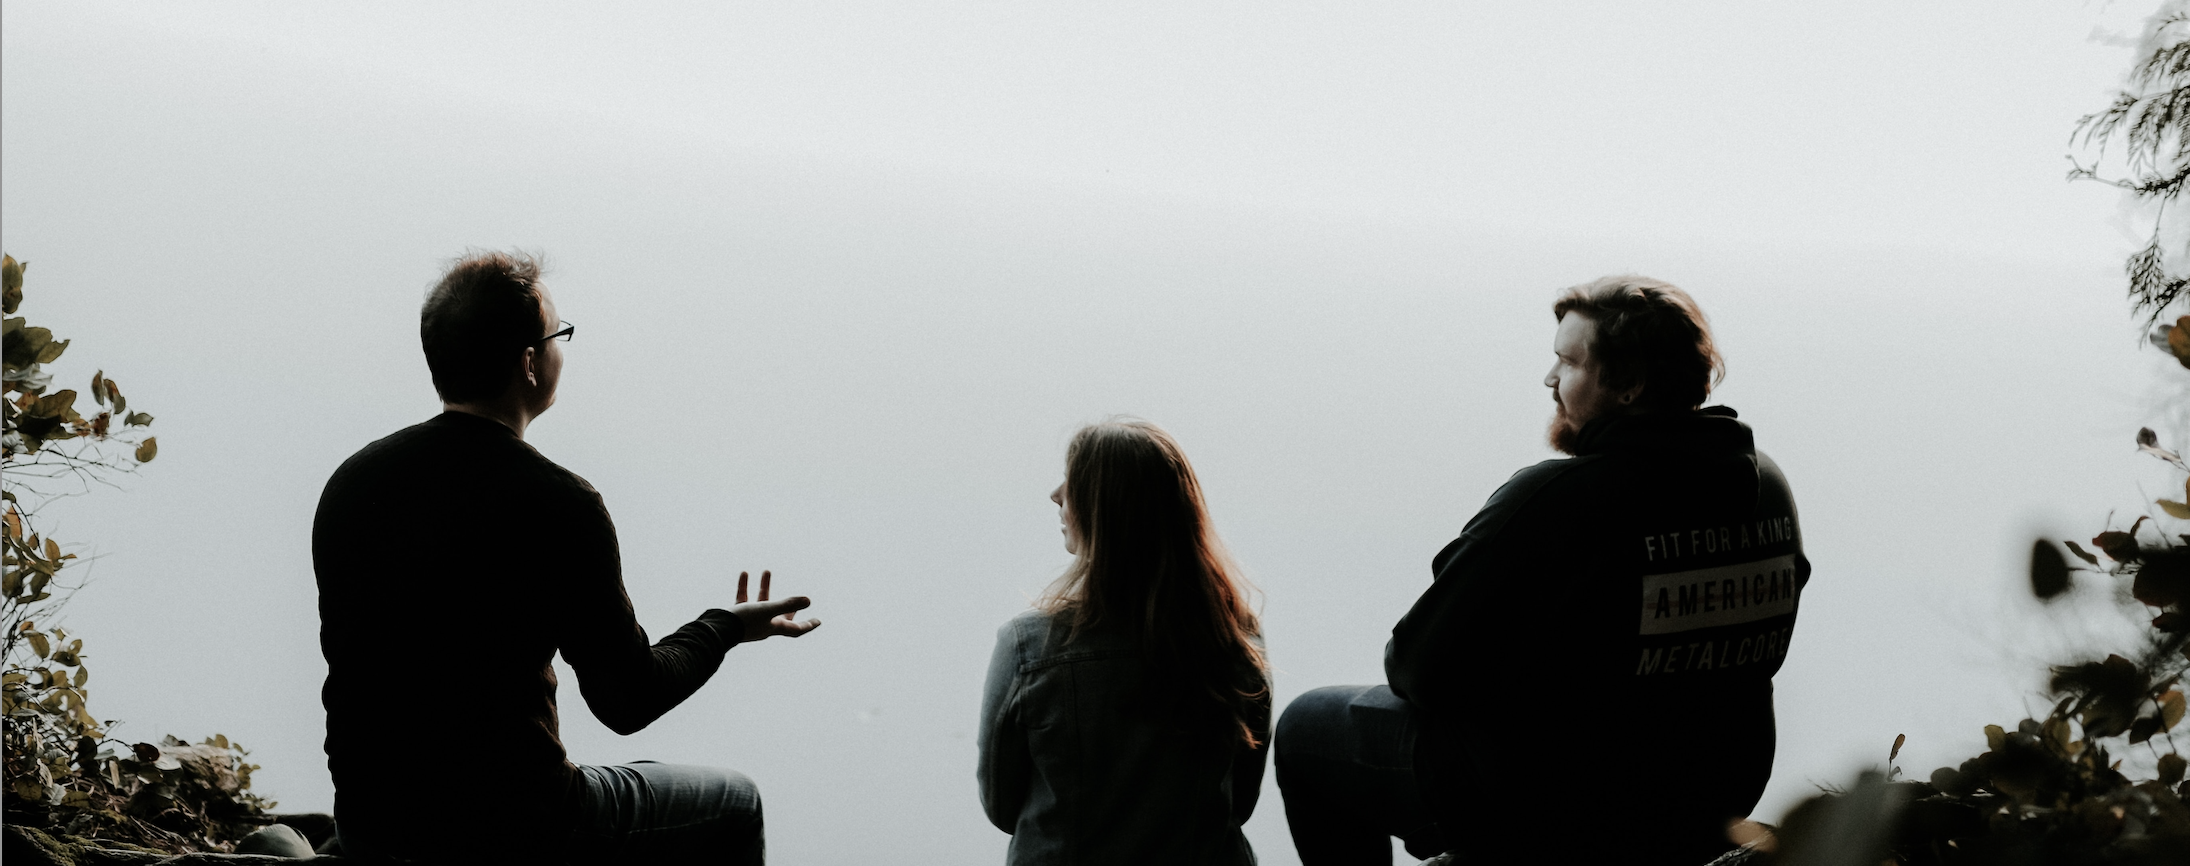 A silhouette of three people sitting on a cliff in foggy weather